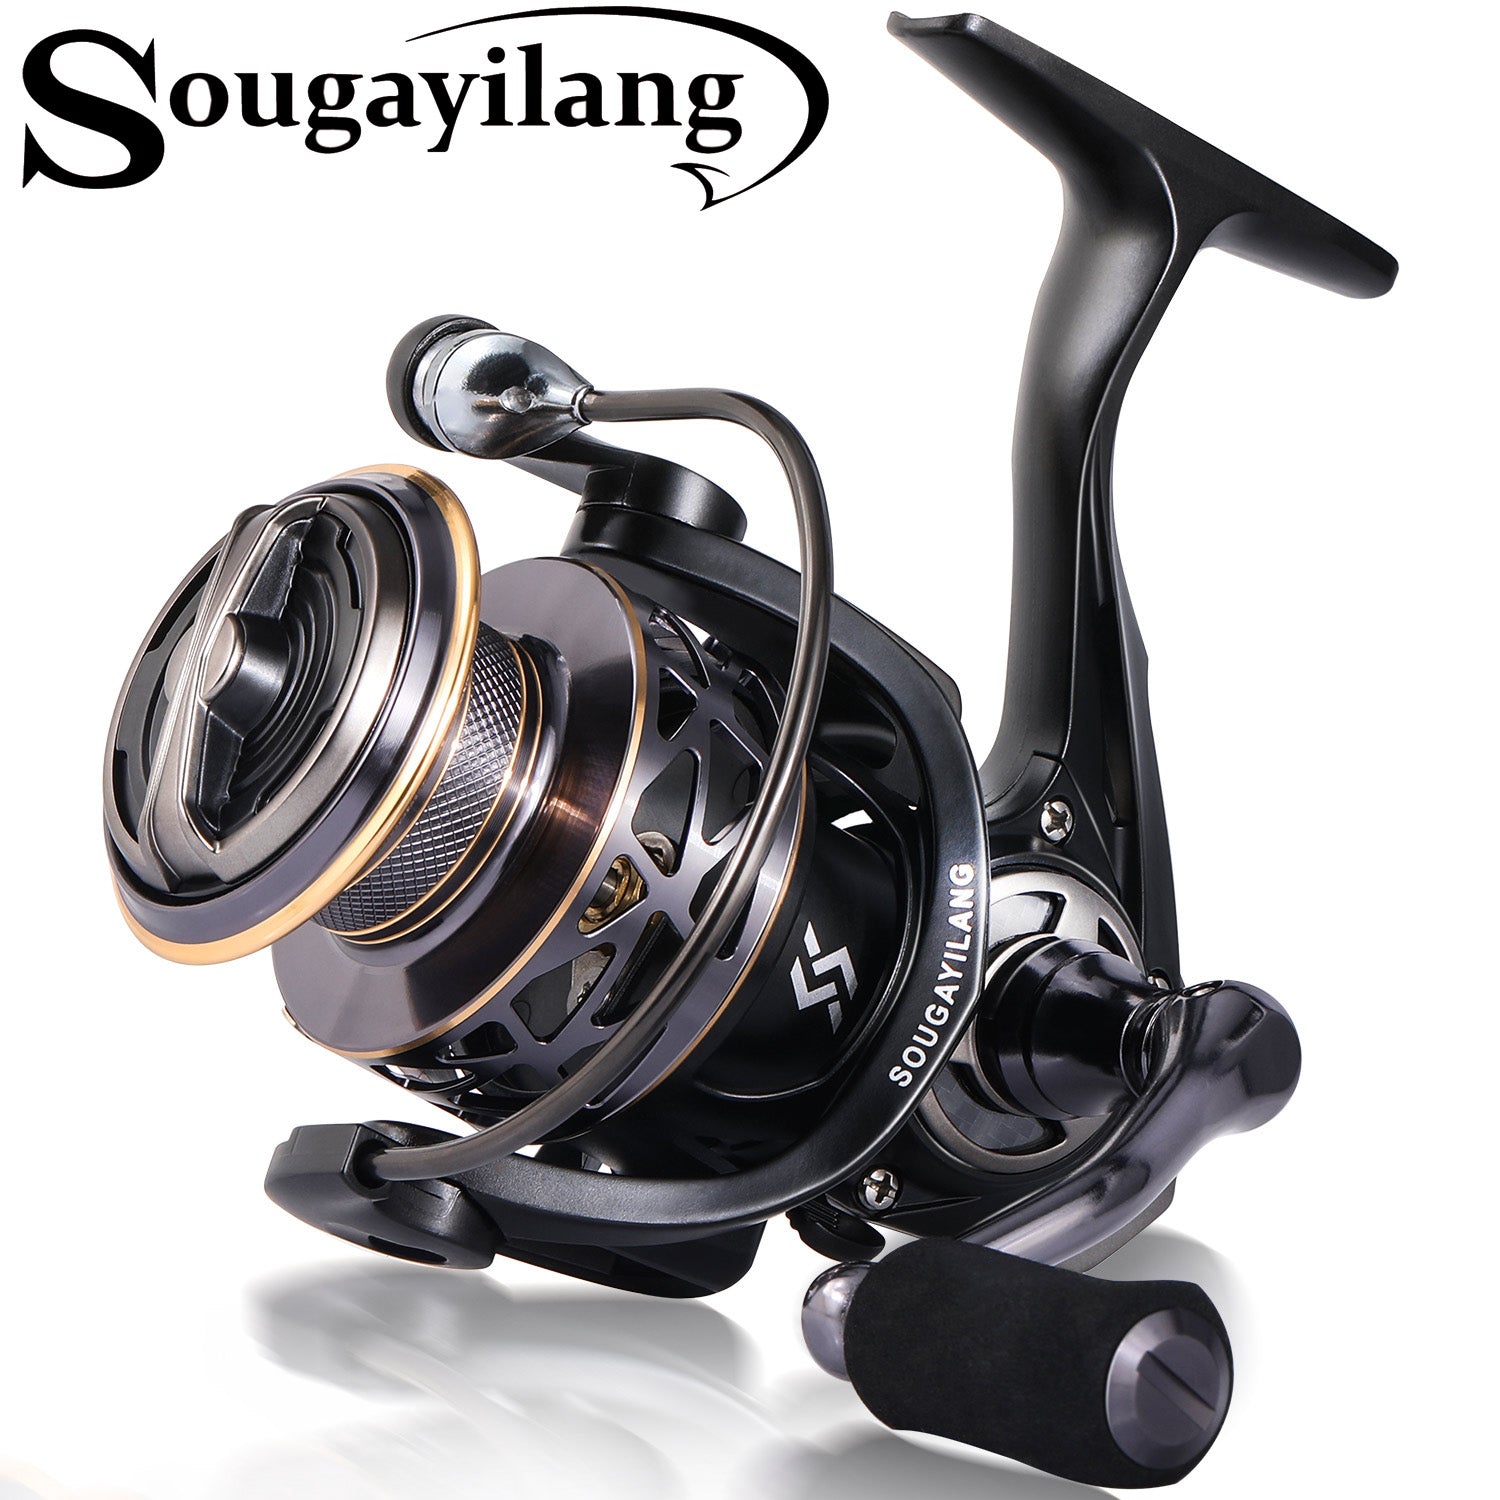 Sougayilang Spinning Reel - 6.2:1 High Speed Gear Ratio, Freshwater a